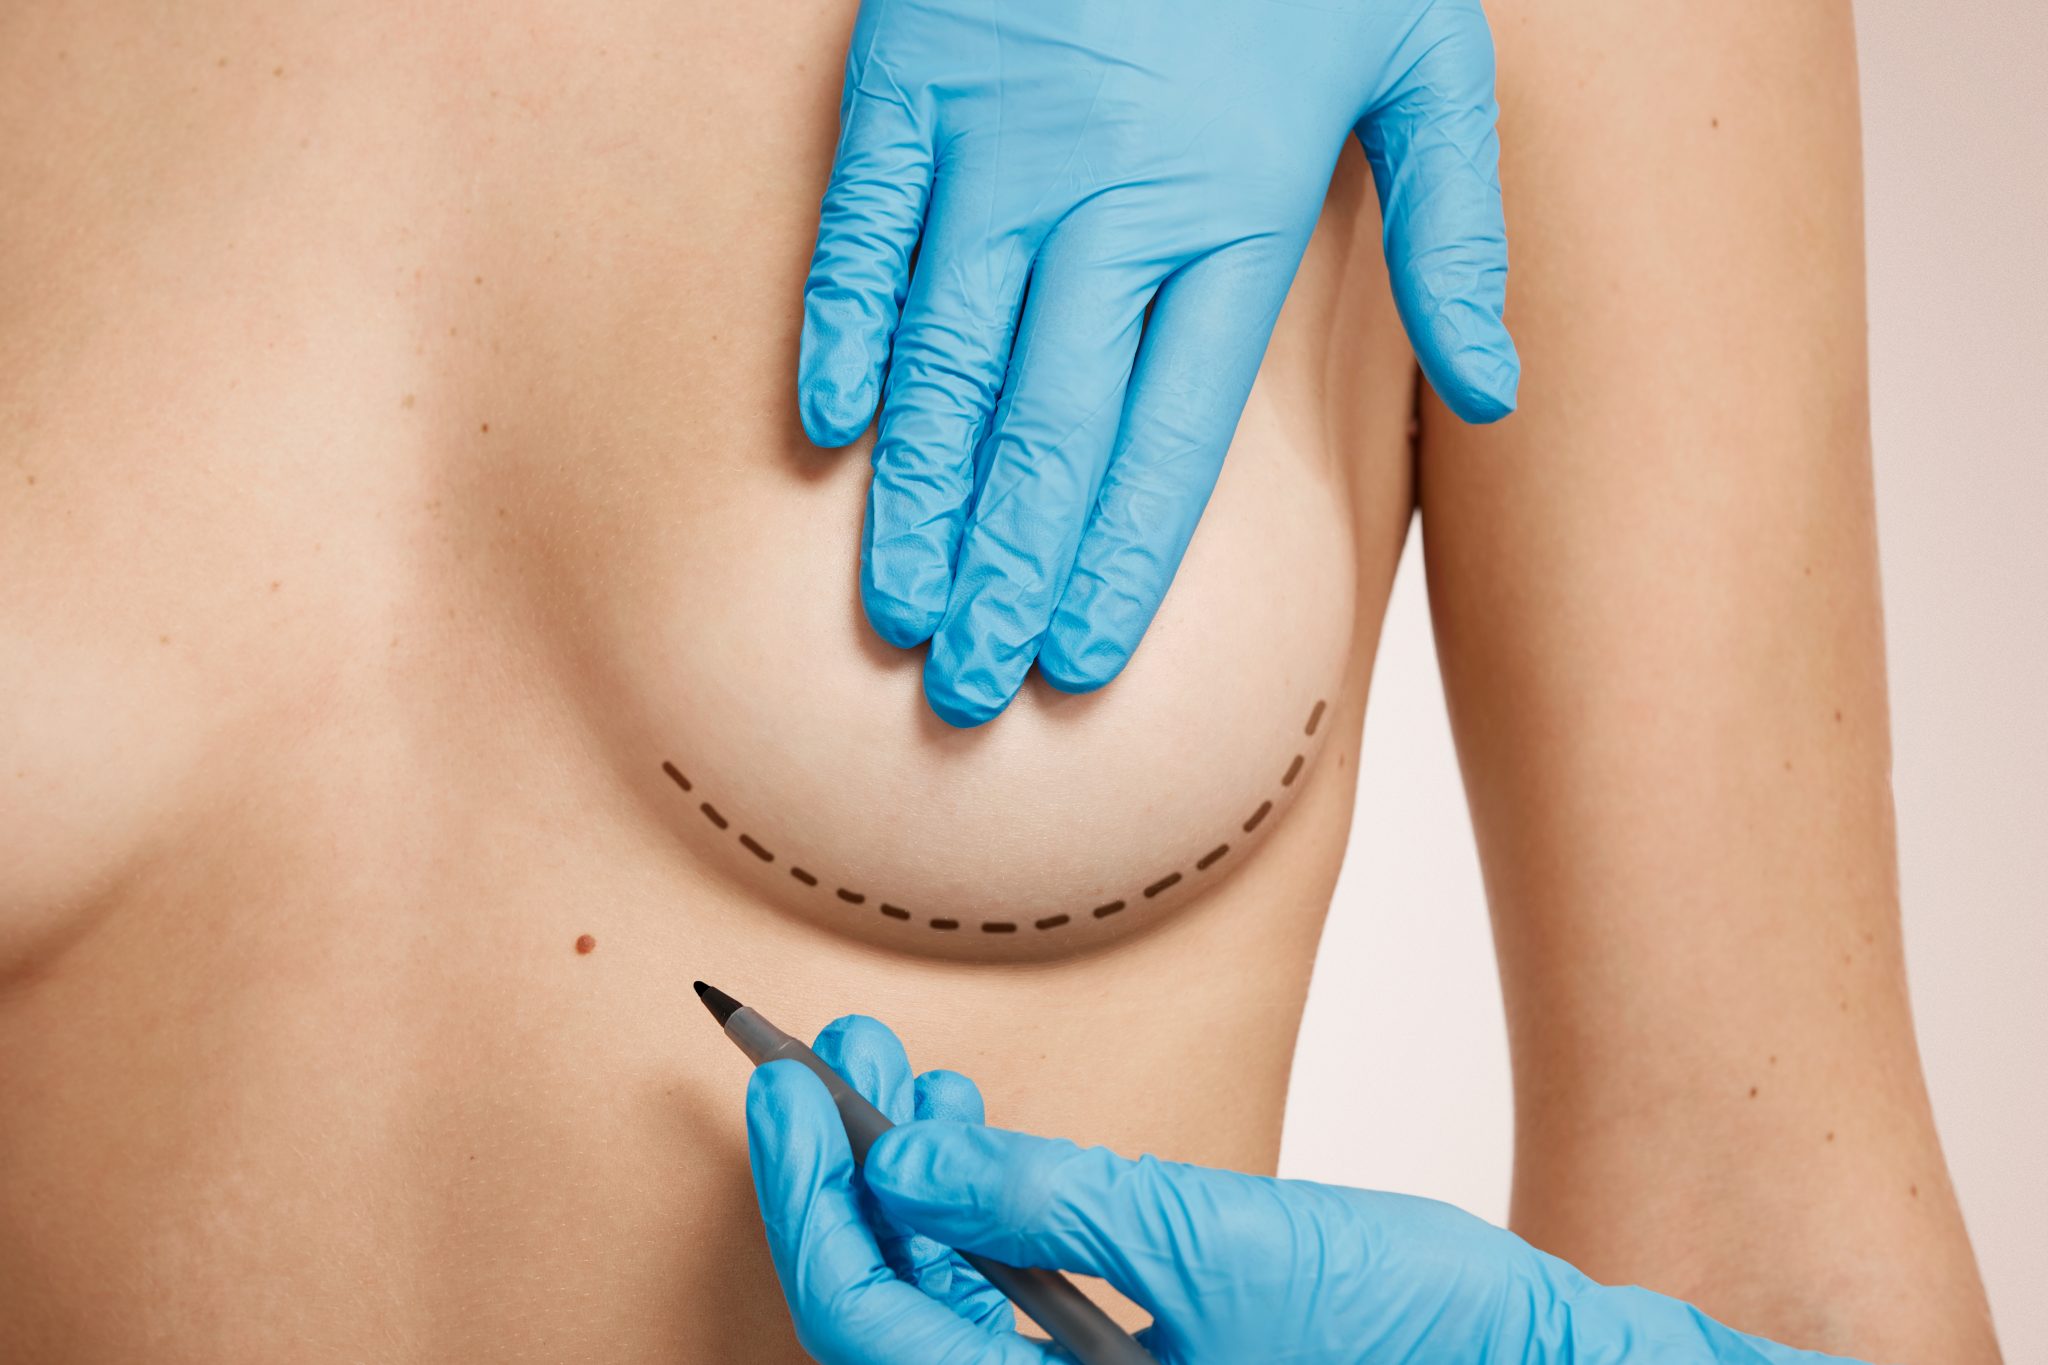 Self-Fat Injection or Implant For Breast Augmentation?